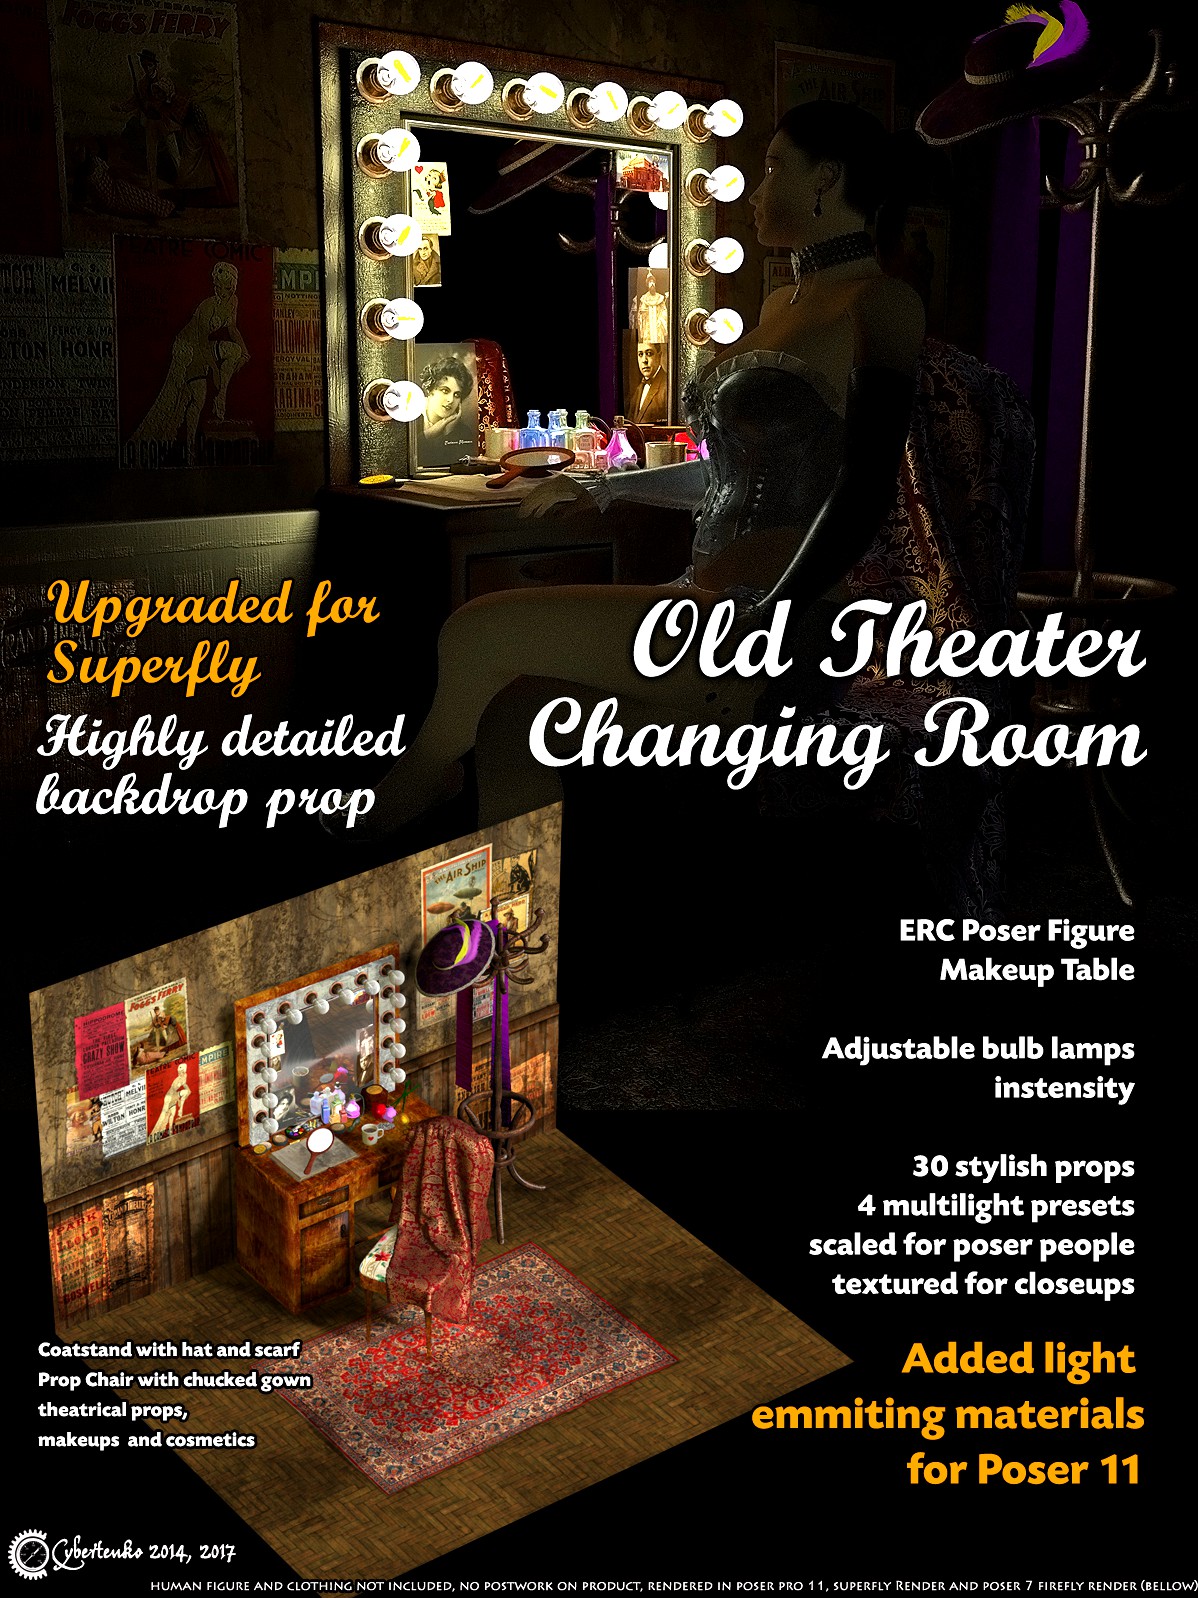 Old Theater Changing Room